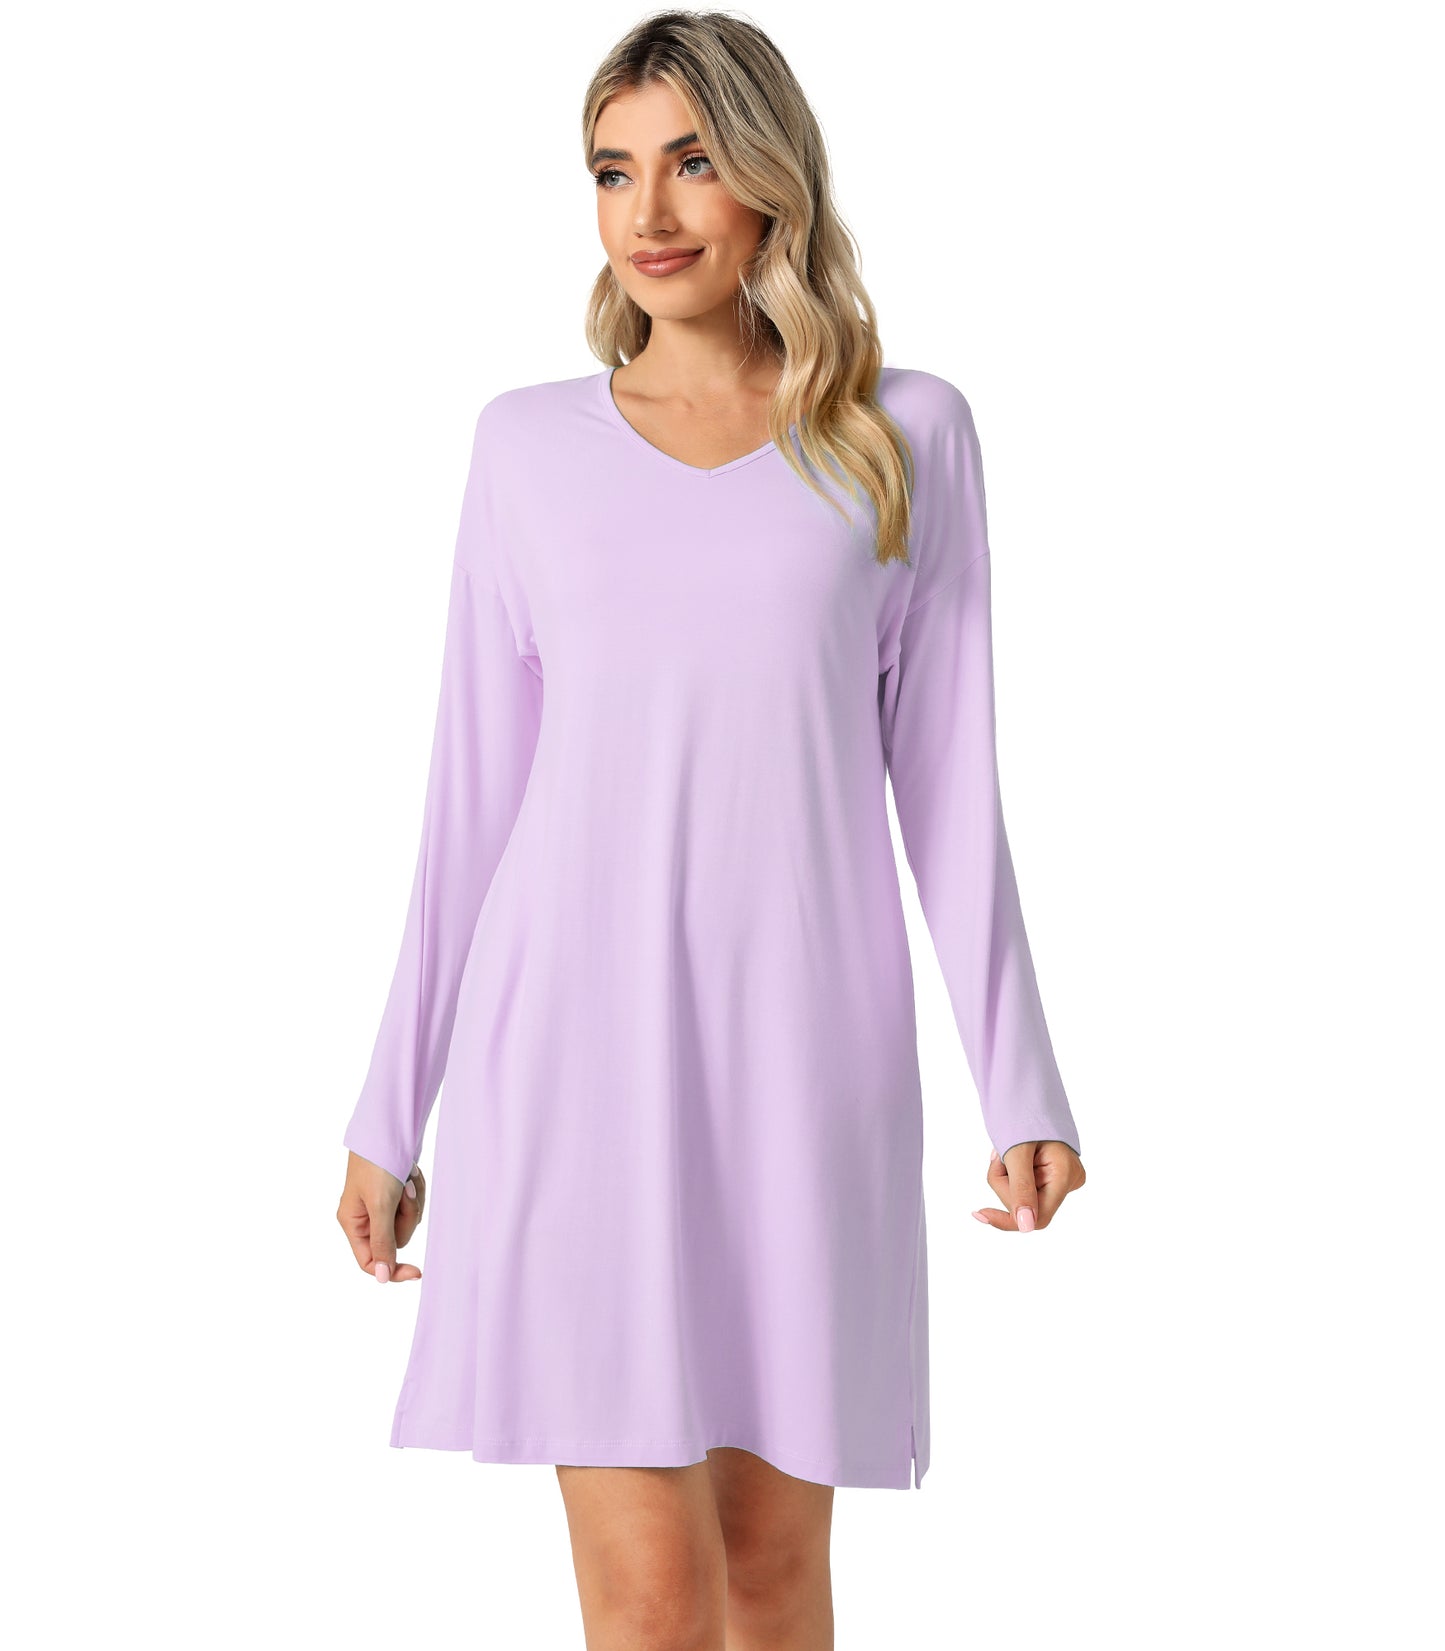 WiWi Bamboo Viscose Nightgowns for Women Soft Long Sleeve